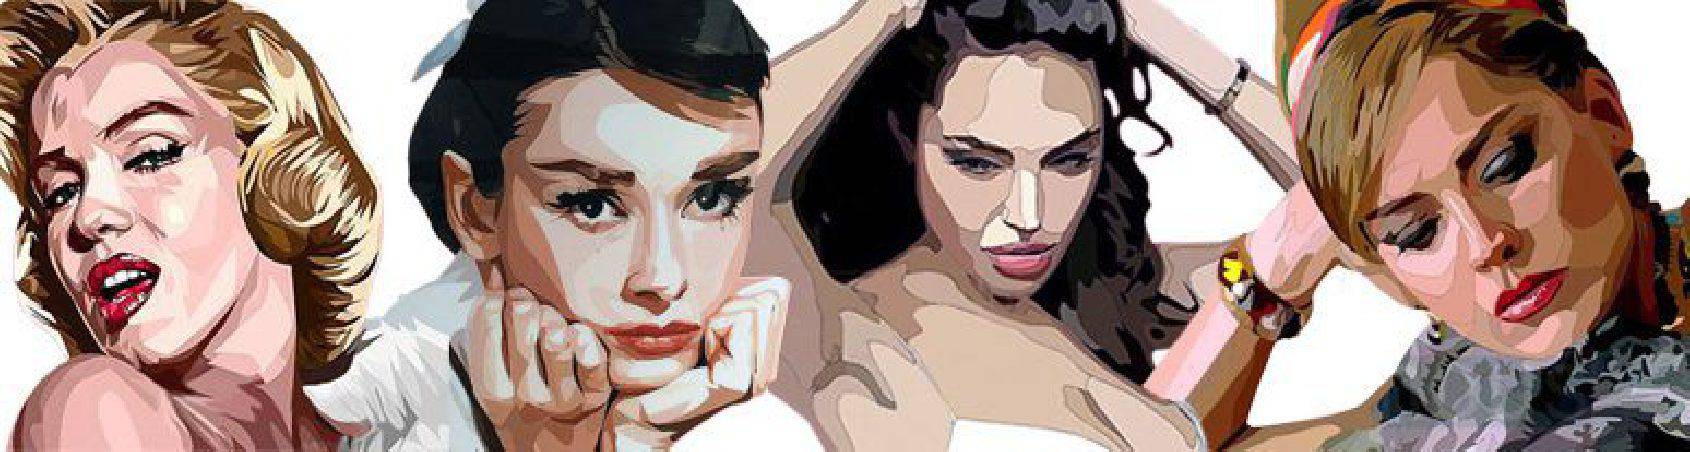 PopArt style paintings-images & compositions film actresses - to buy